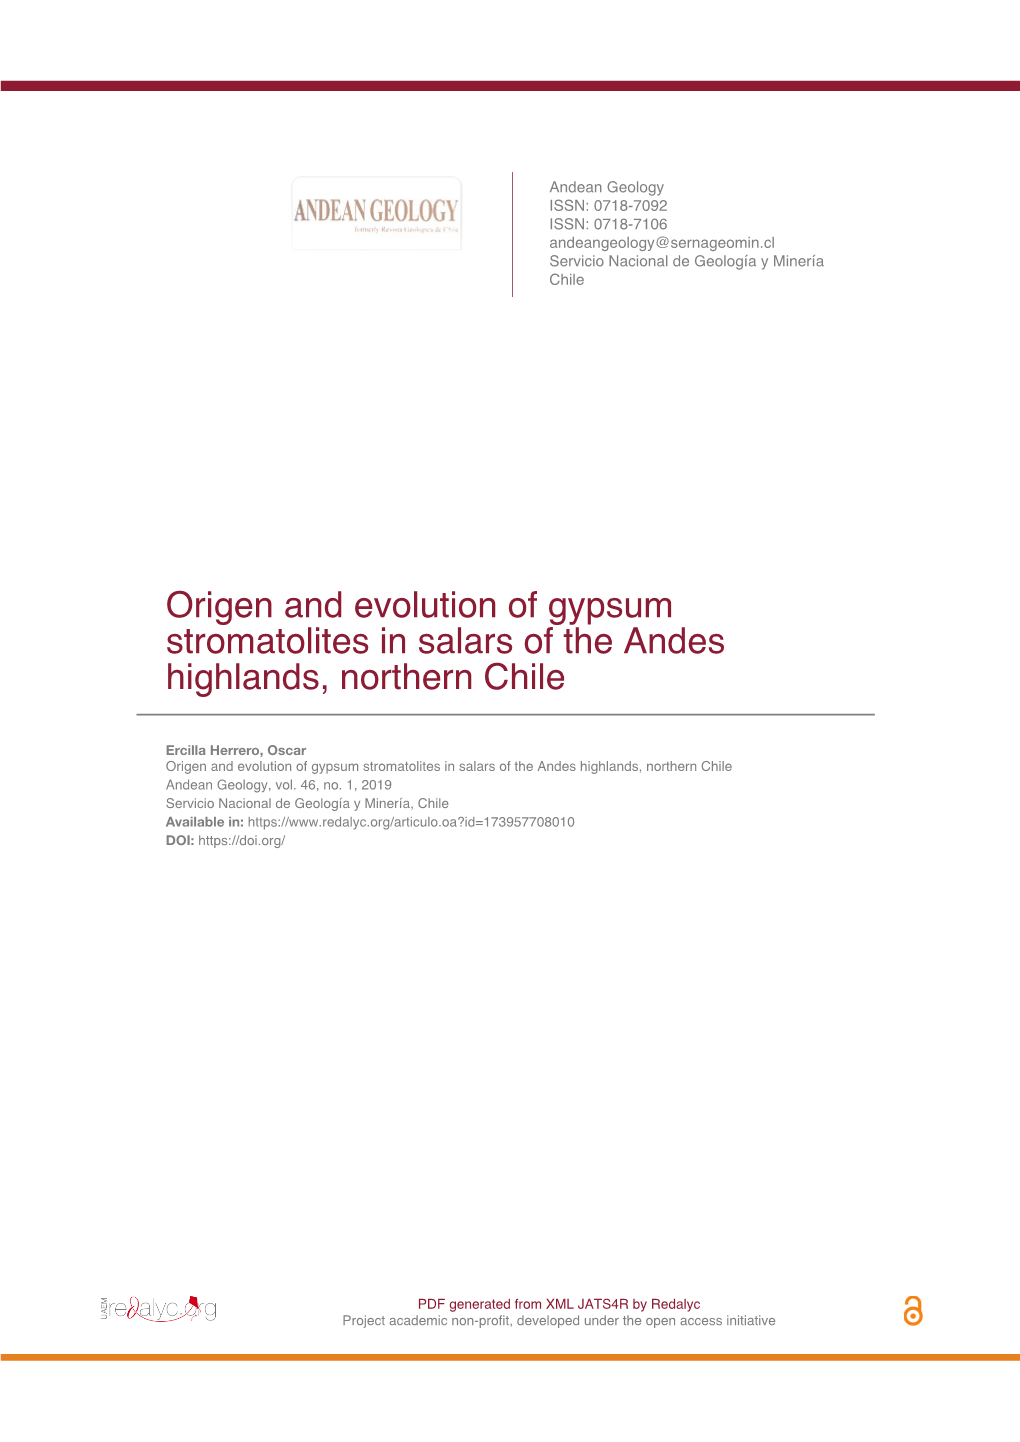 Origen and Evolution of Gypsum Stromatolites in Salars of the Andes Highlands, Northern Chile